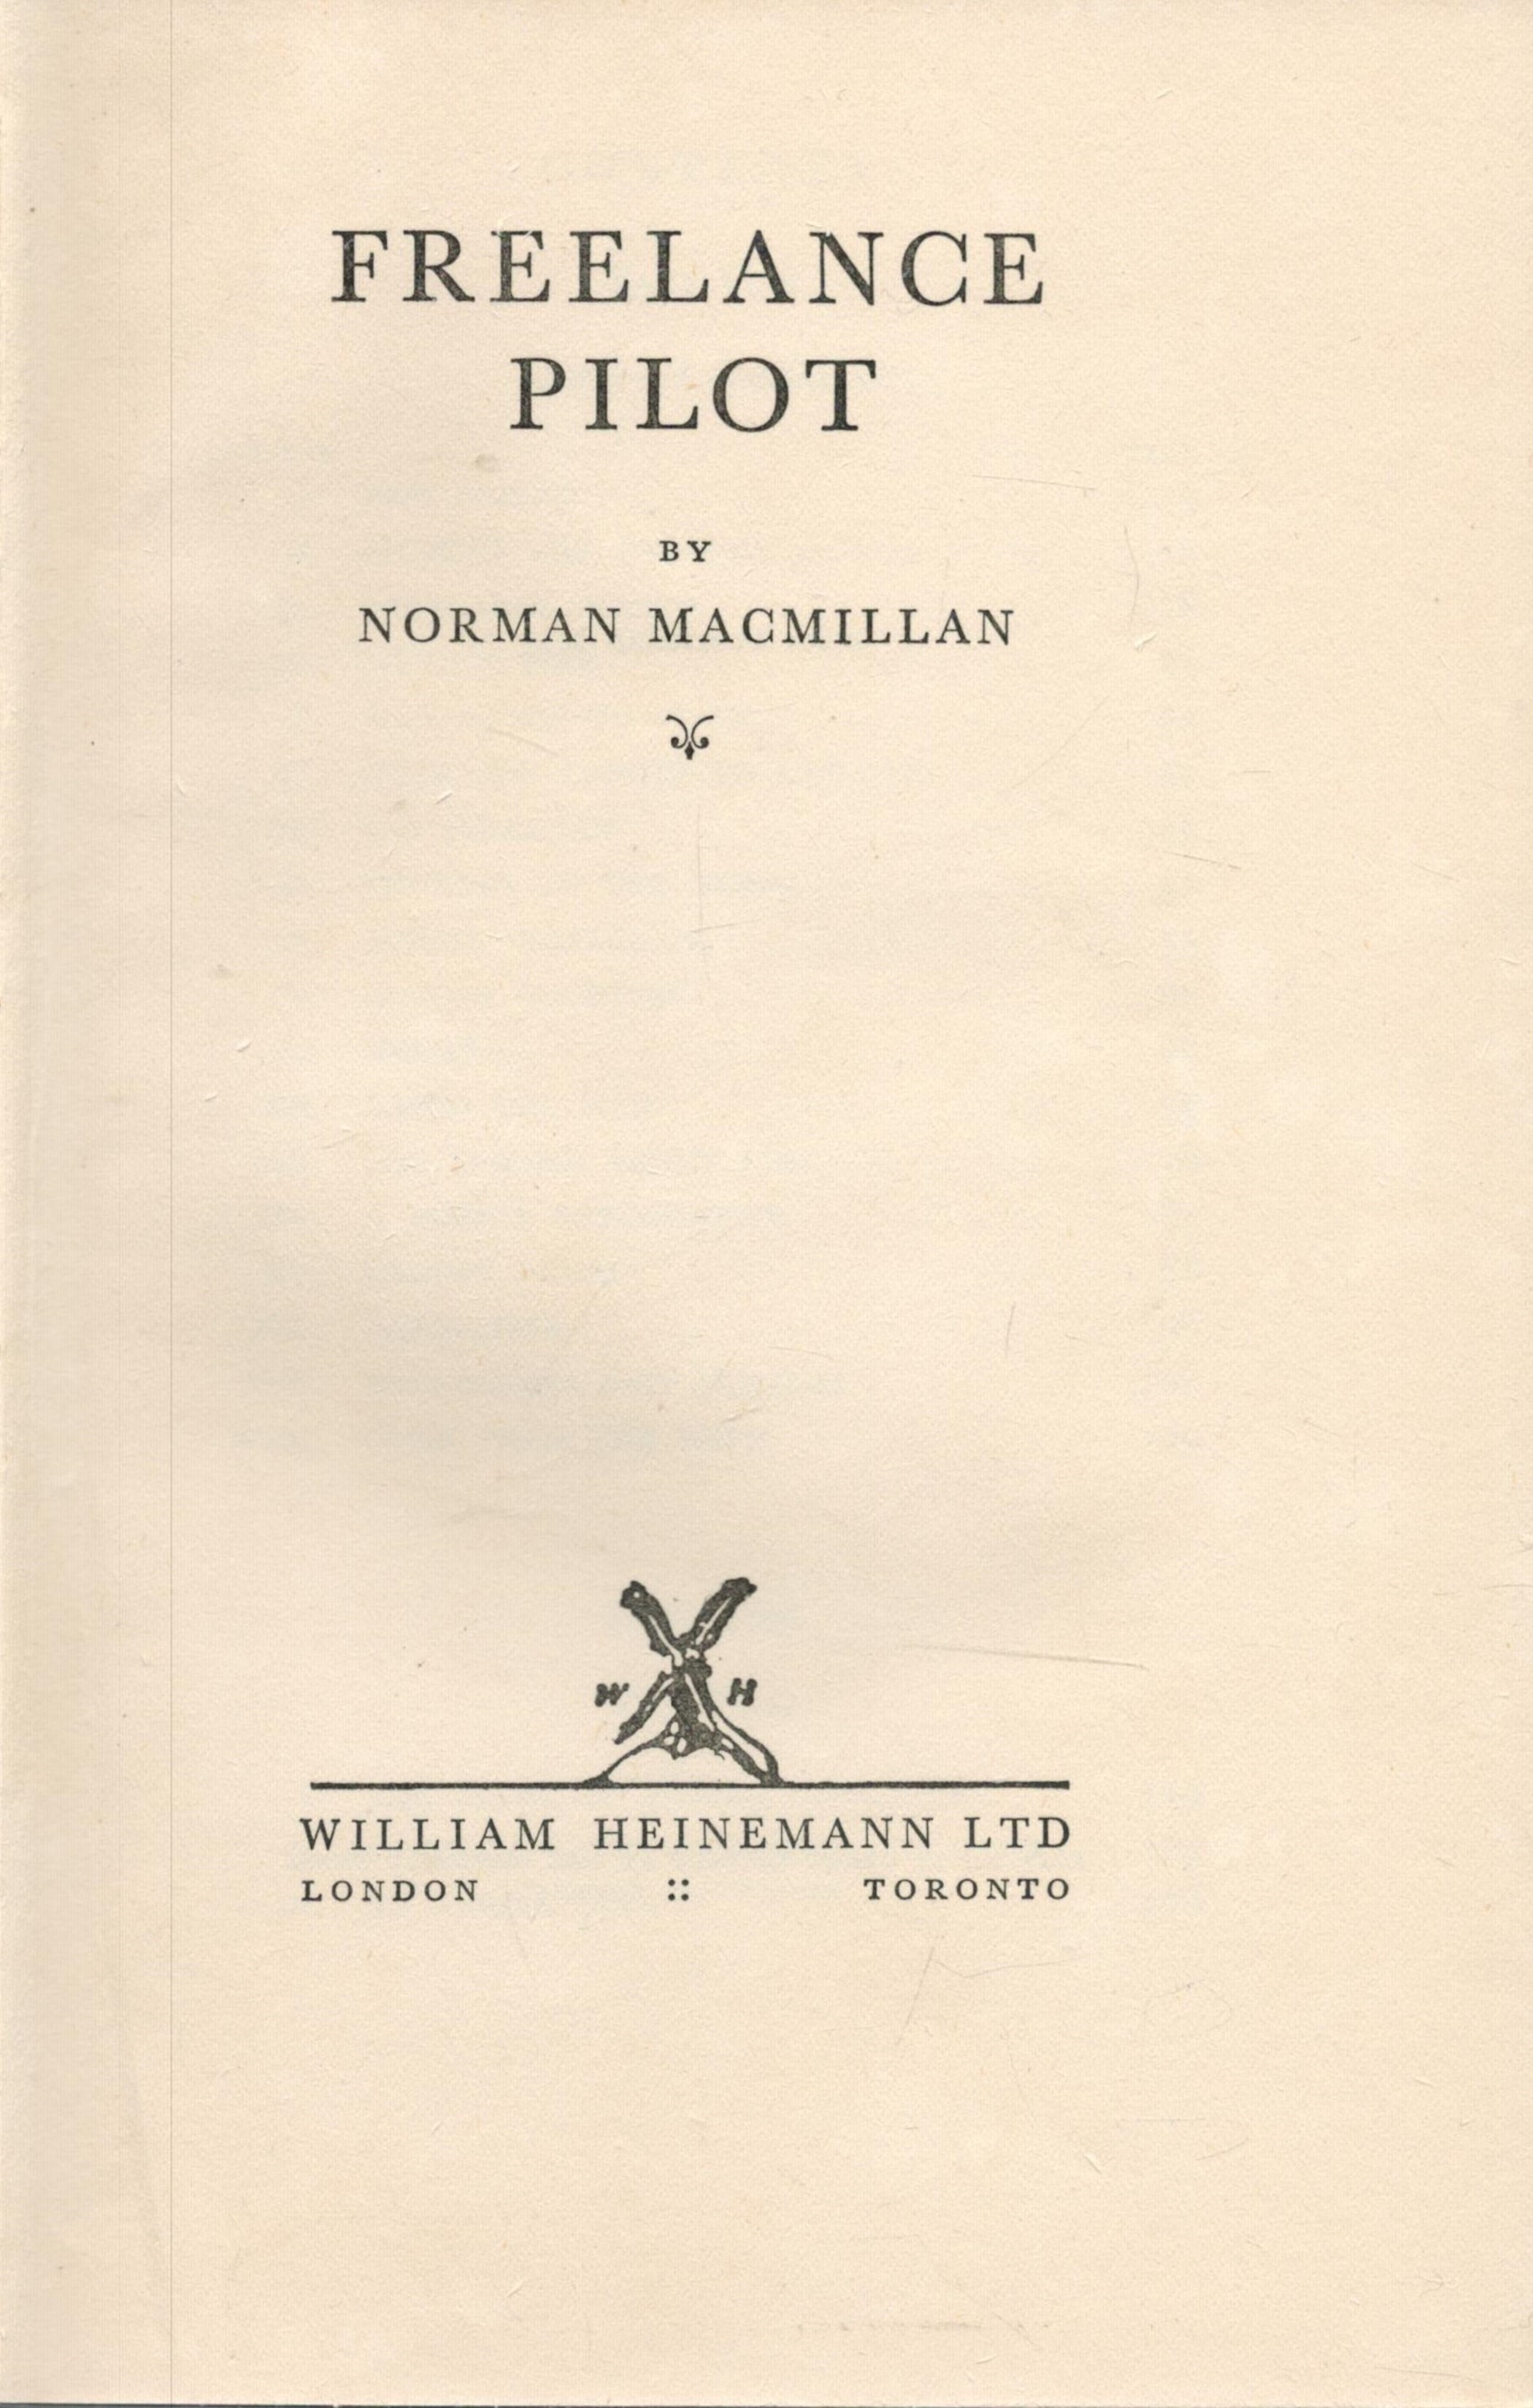 Freelance Pilot by Norman Macmillan 1937 First Edition Hardback Book with 321 pages published by - Image 2 of 2